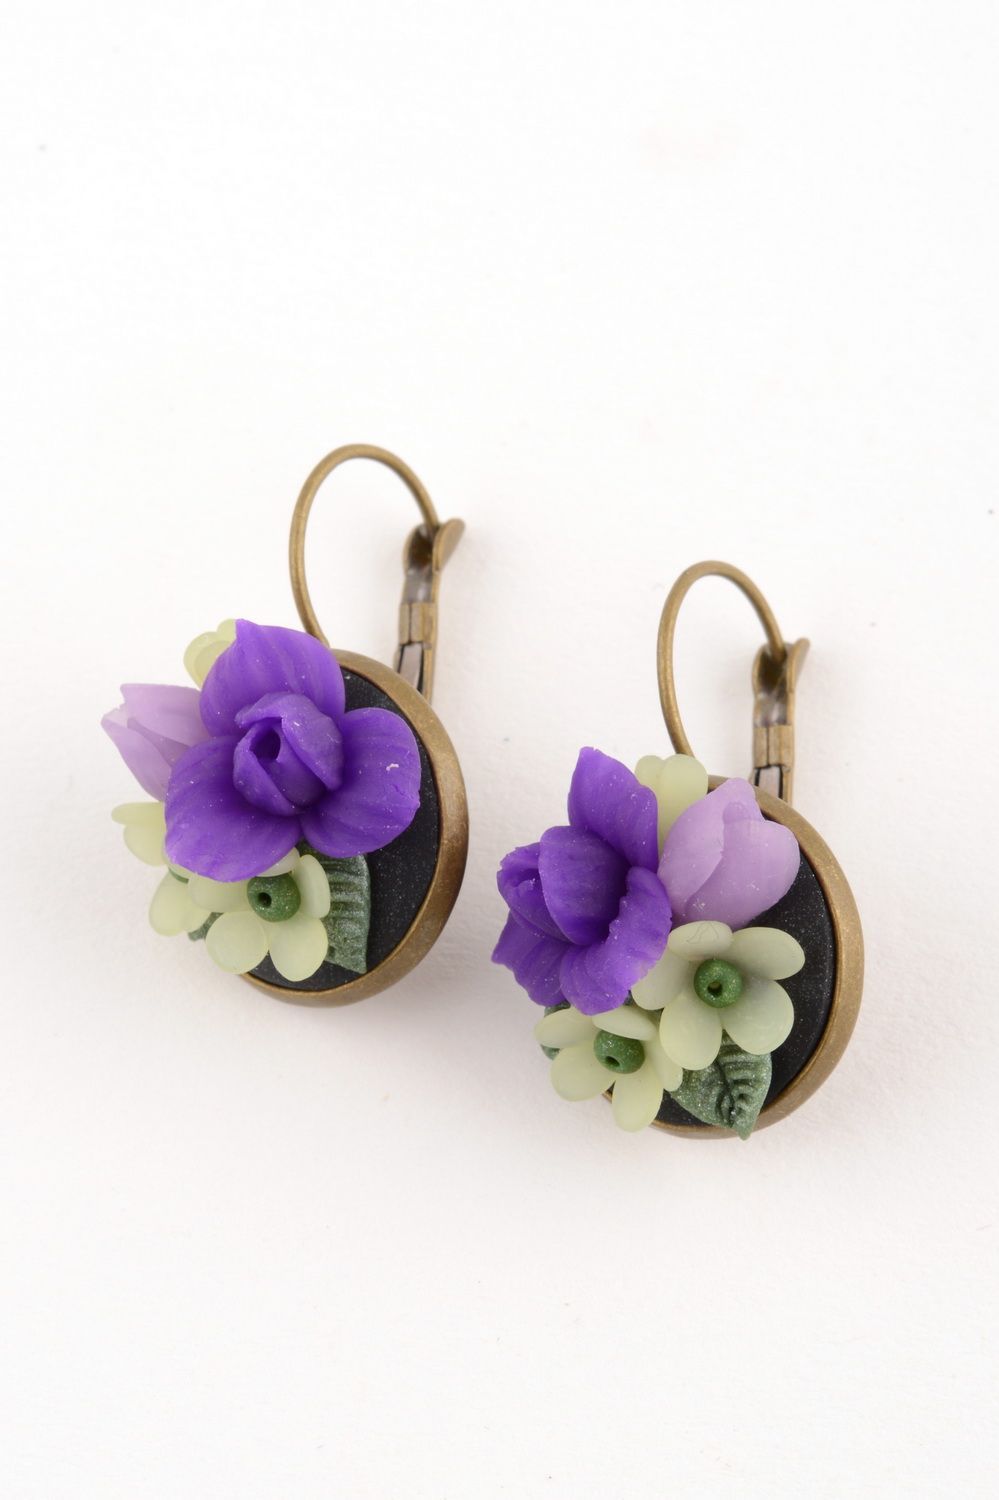 Handmade stylish festive cute earrings made of polymer clay with flowers photo 3